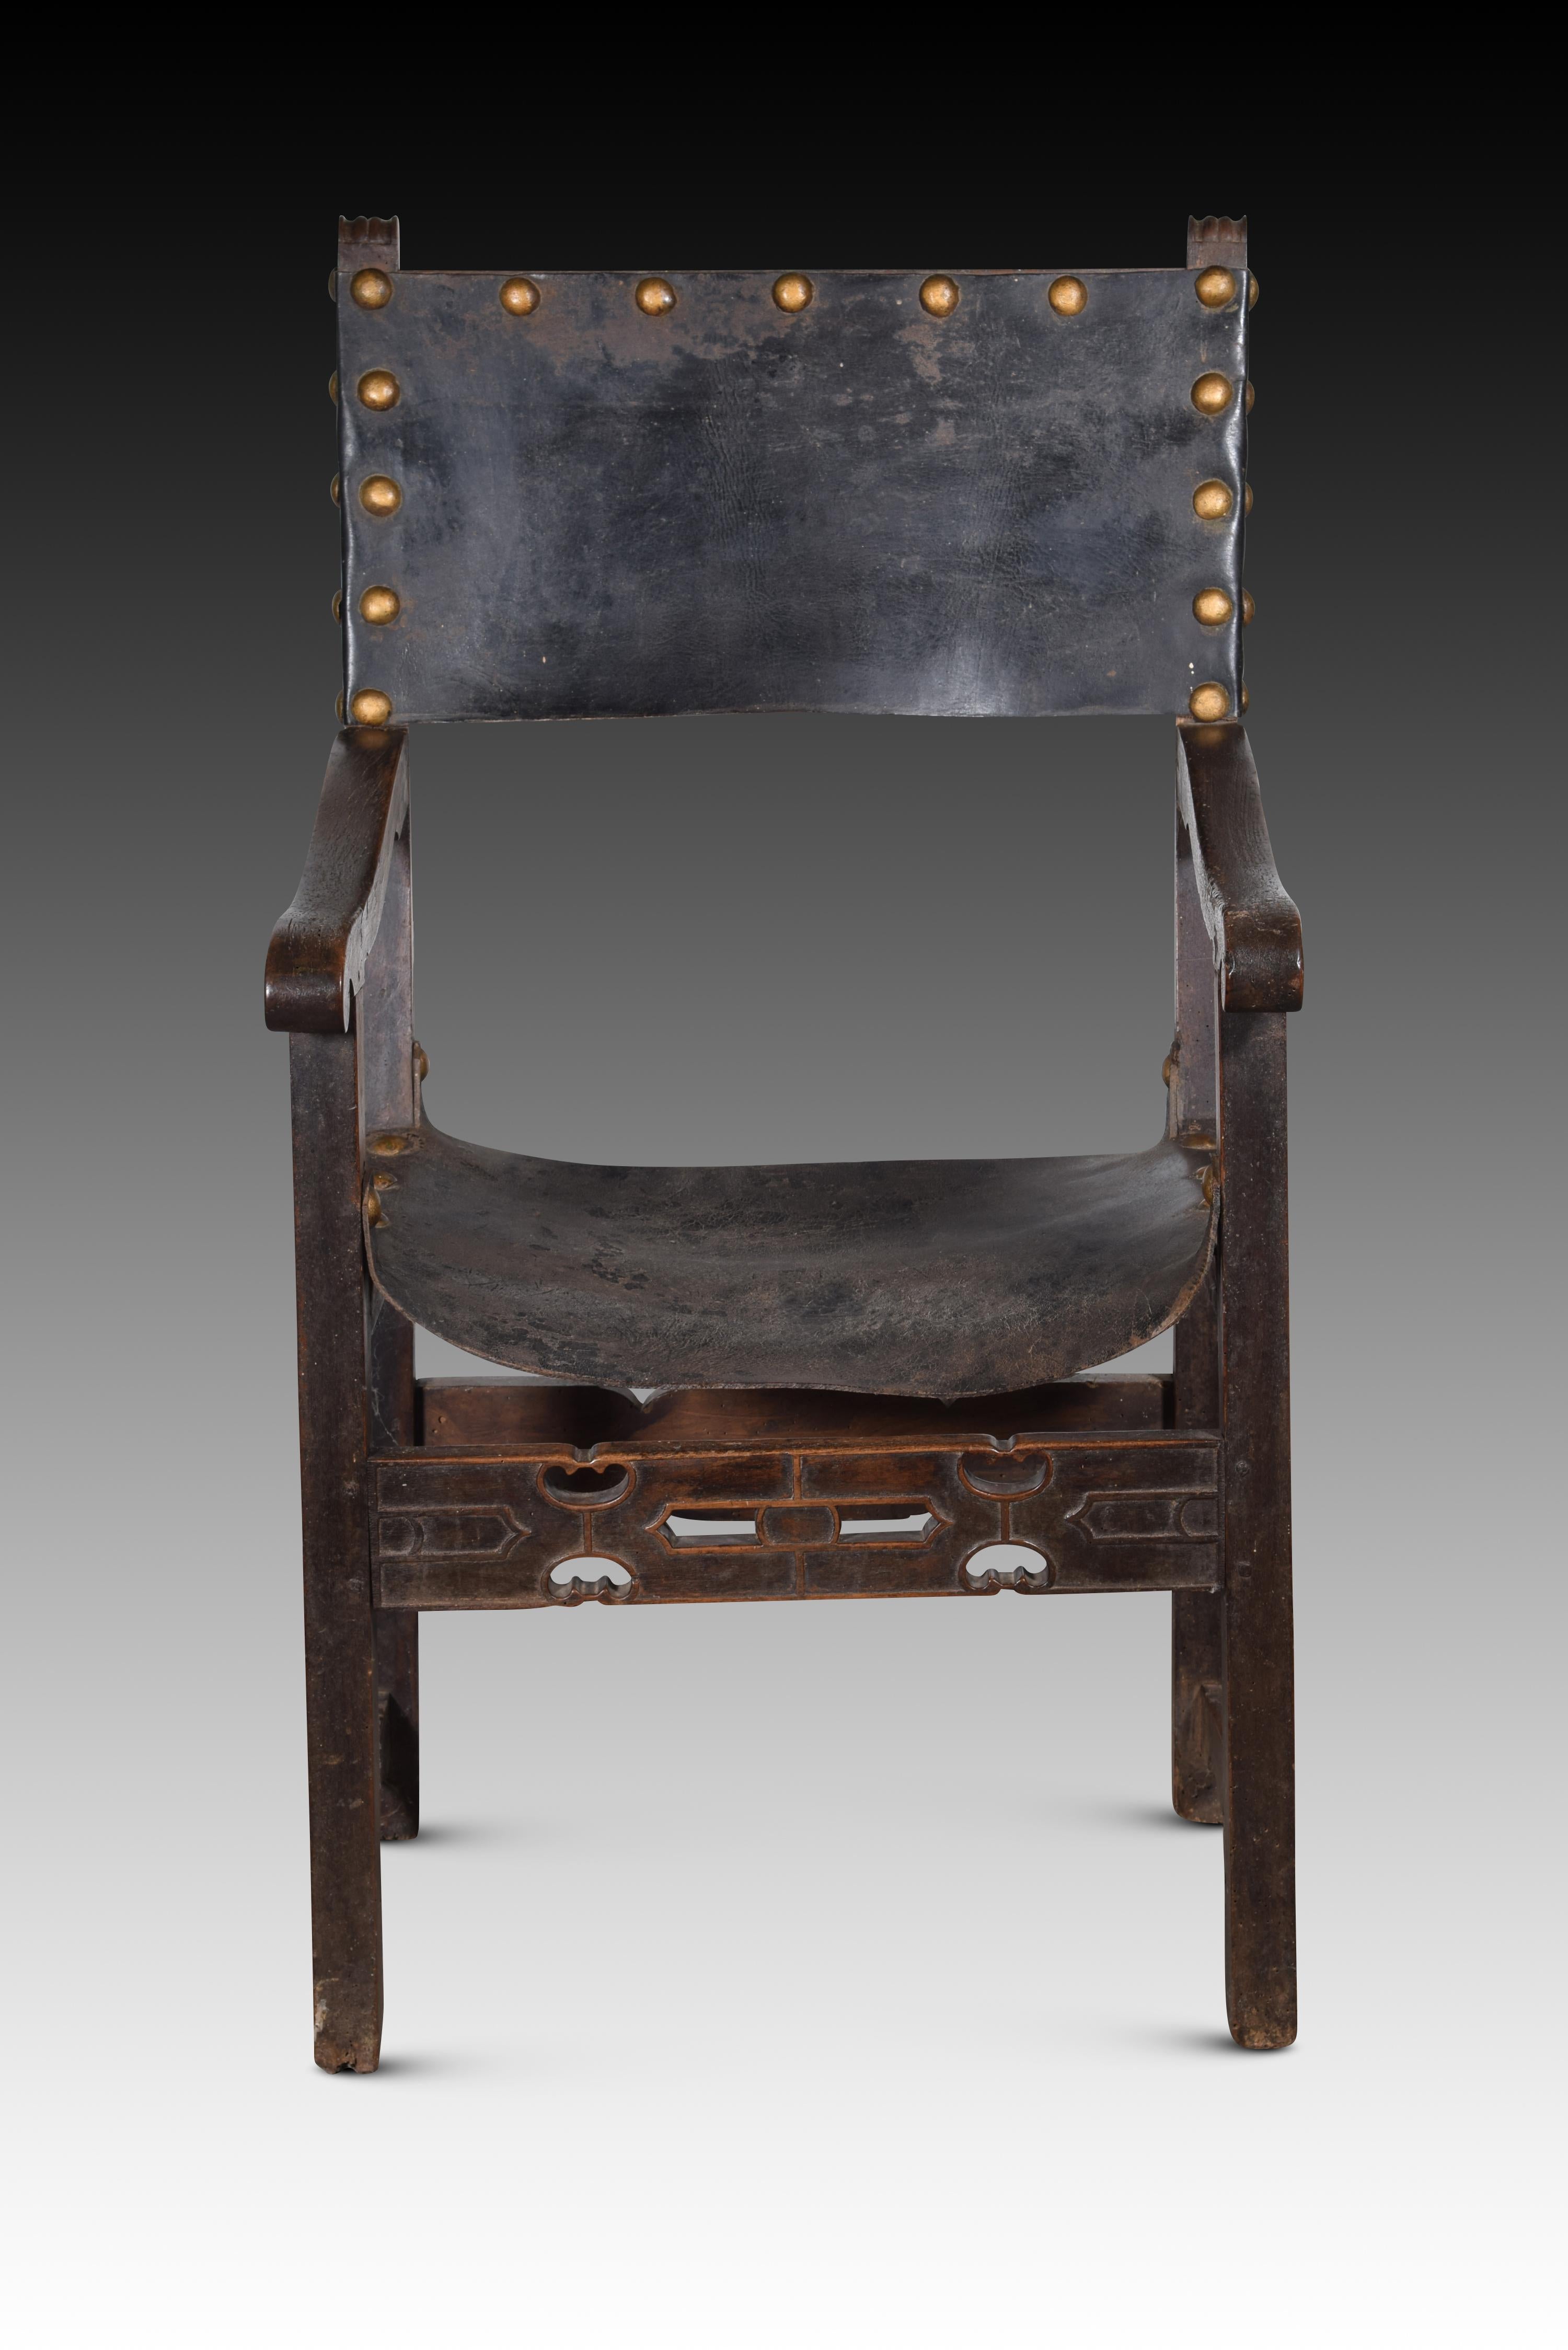 Friar armchair. Leather, walnut wood. Spain, 16th century. 
Armchair with arms and high back of the type known as “frailero”, which has studded leather on the seat and upper part of the back, low cut-out low profile chambrances joining the front